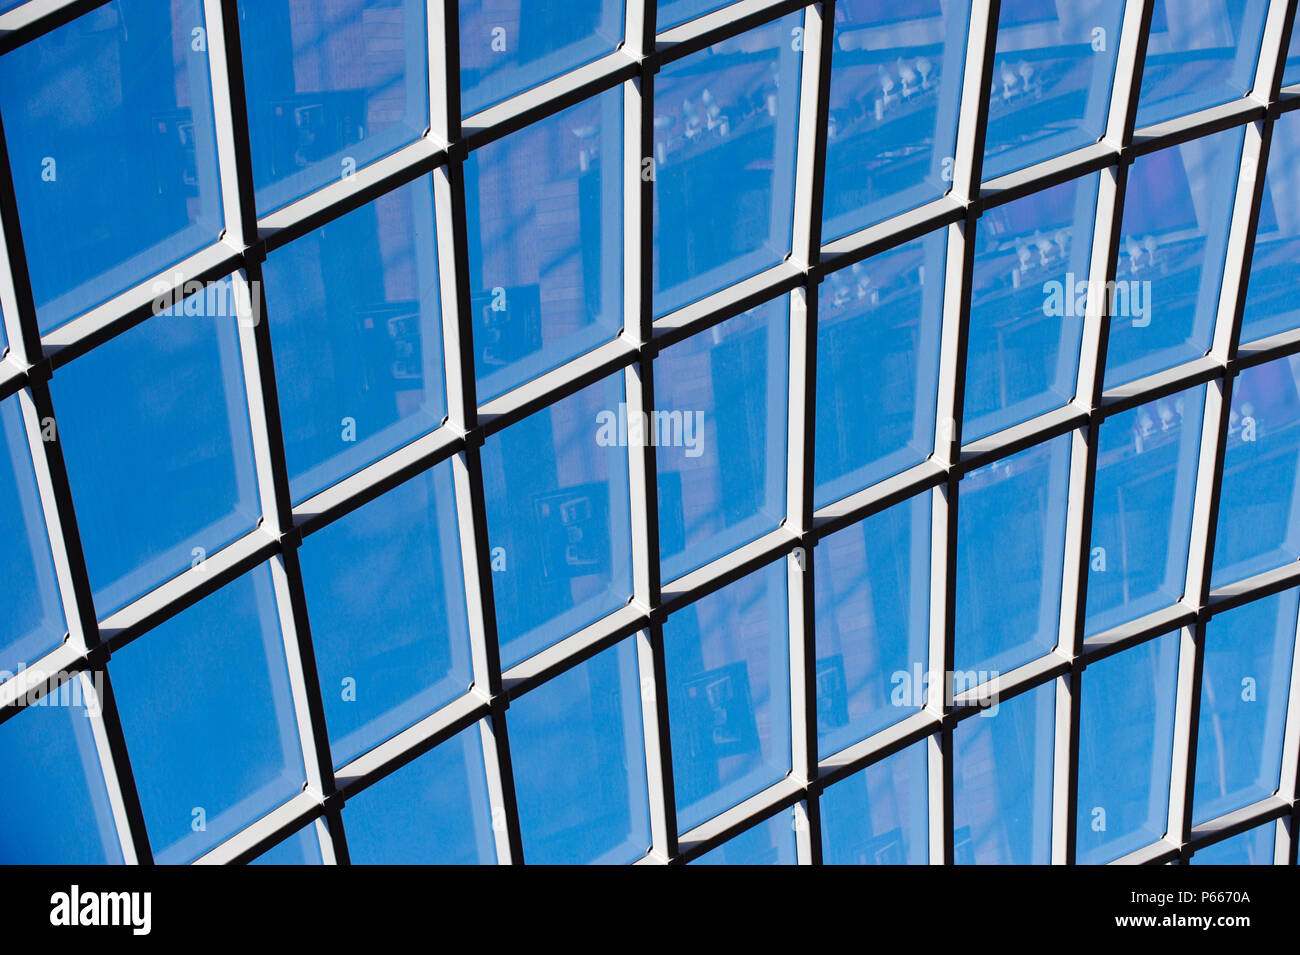 Cabot Circus Shopping Centre roof, Bristol, UK, 2008 Stock Photo